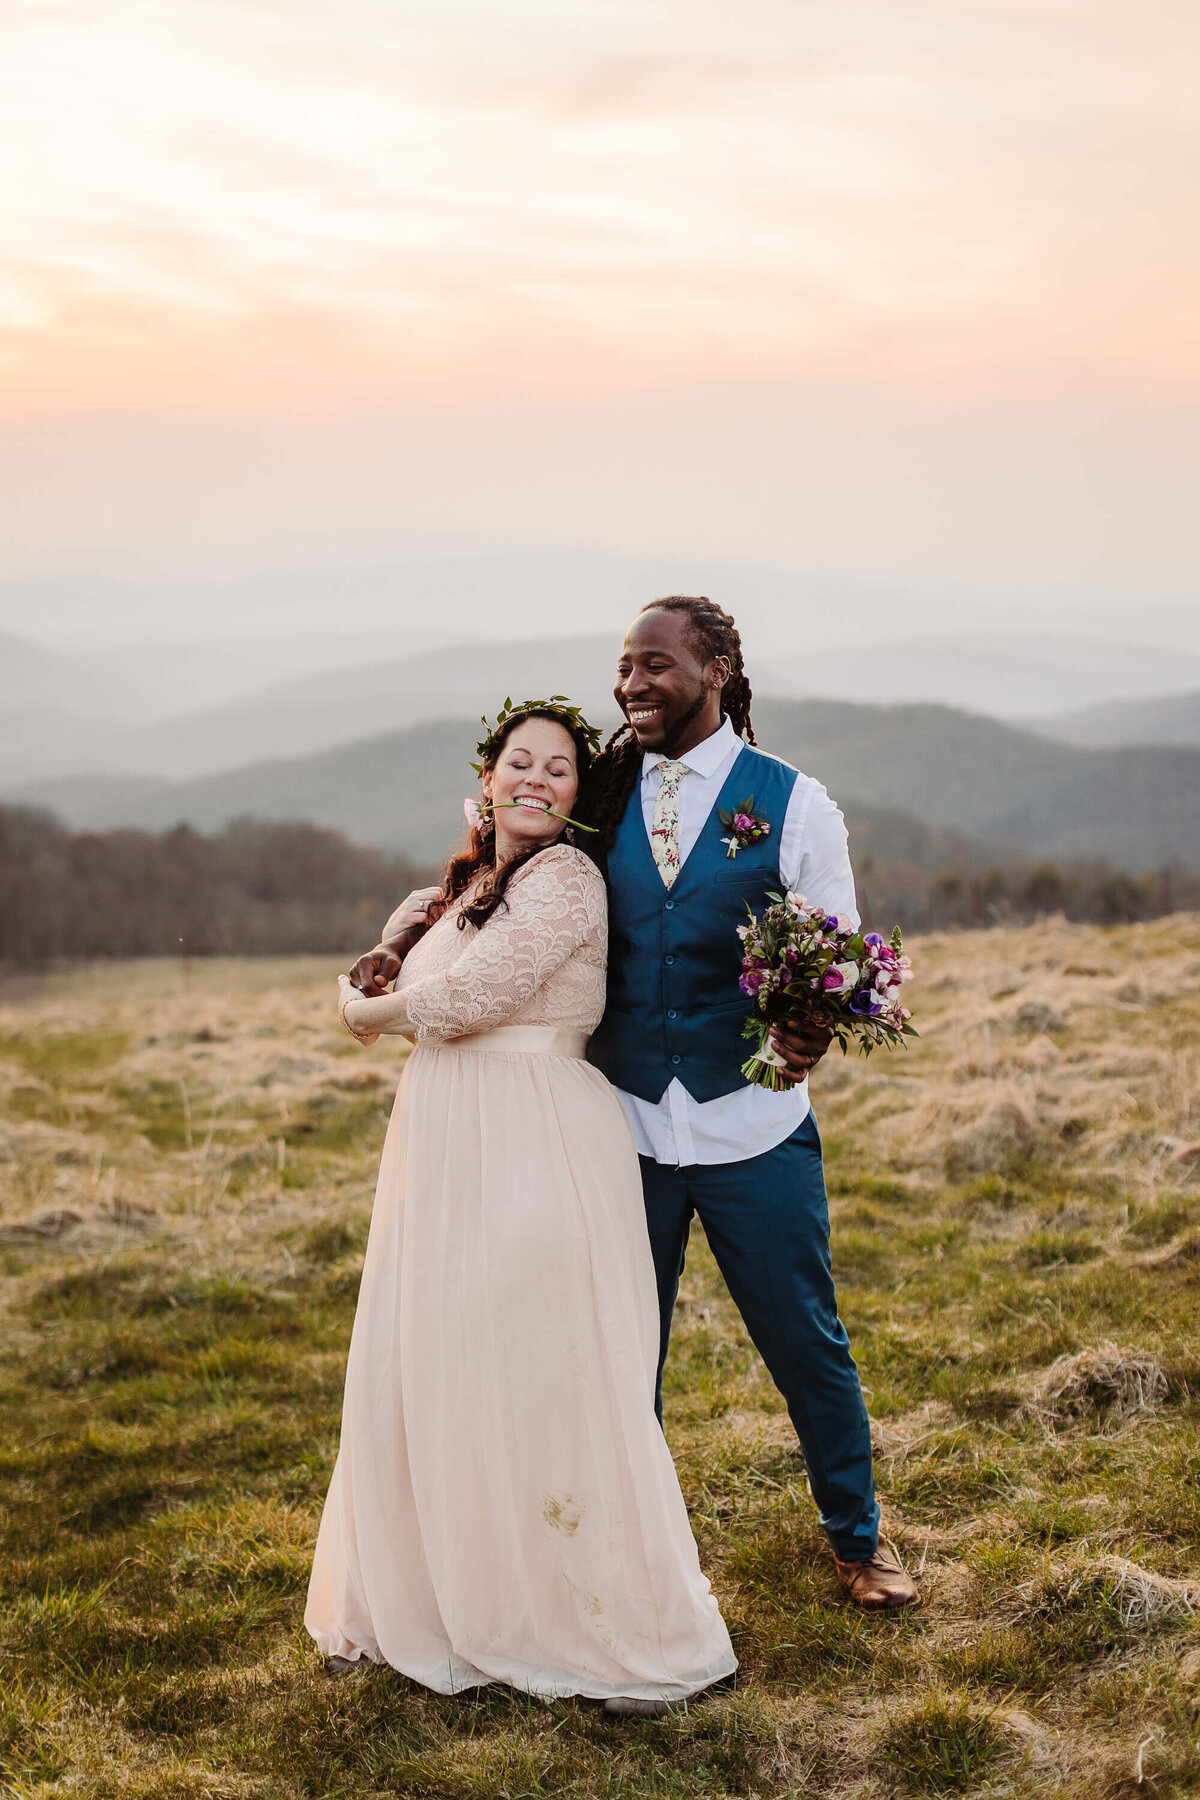 Max-Patch-Sunset-Mountain-Elopement-125